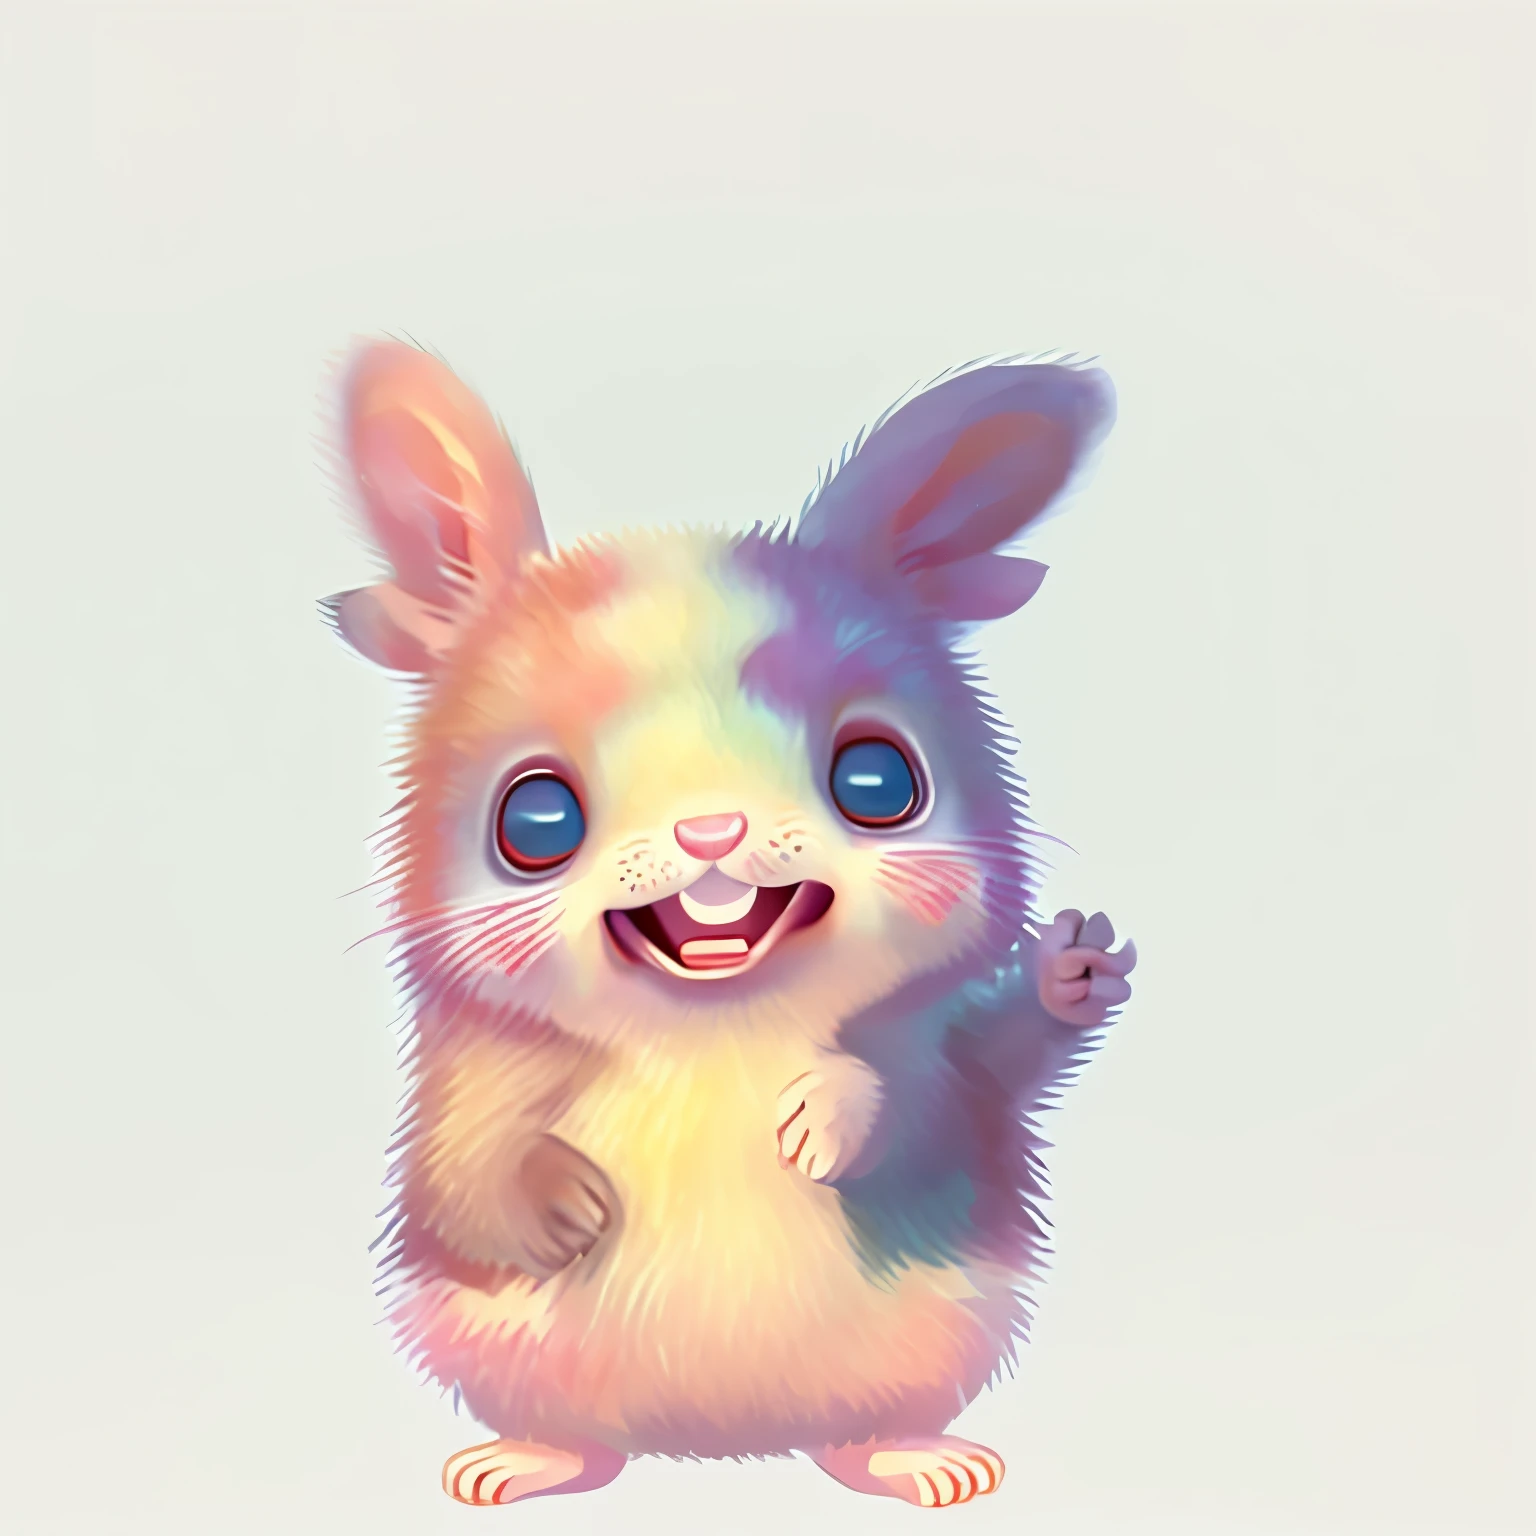 small Hamster, adorable digital painting, cute animal, hamster, smile teeth, upper_teeth_only, white_background, cute digital art, cute detailed digital art, digitally painted, cute creature, beautiful nature, weasel - ferret - stoat ) ], full body close -up shot, handsome weasel fursona portrait, cute single animal, cute forest creature, cute colorful adorable, realistic